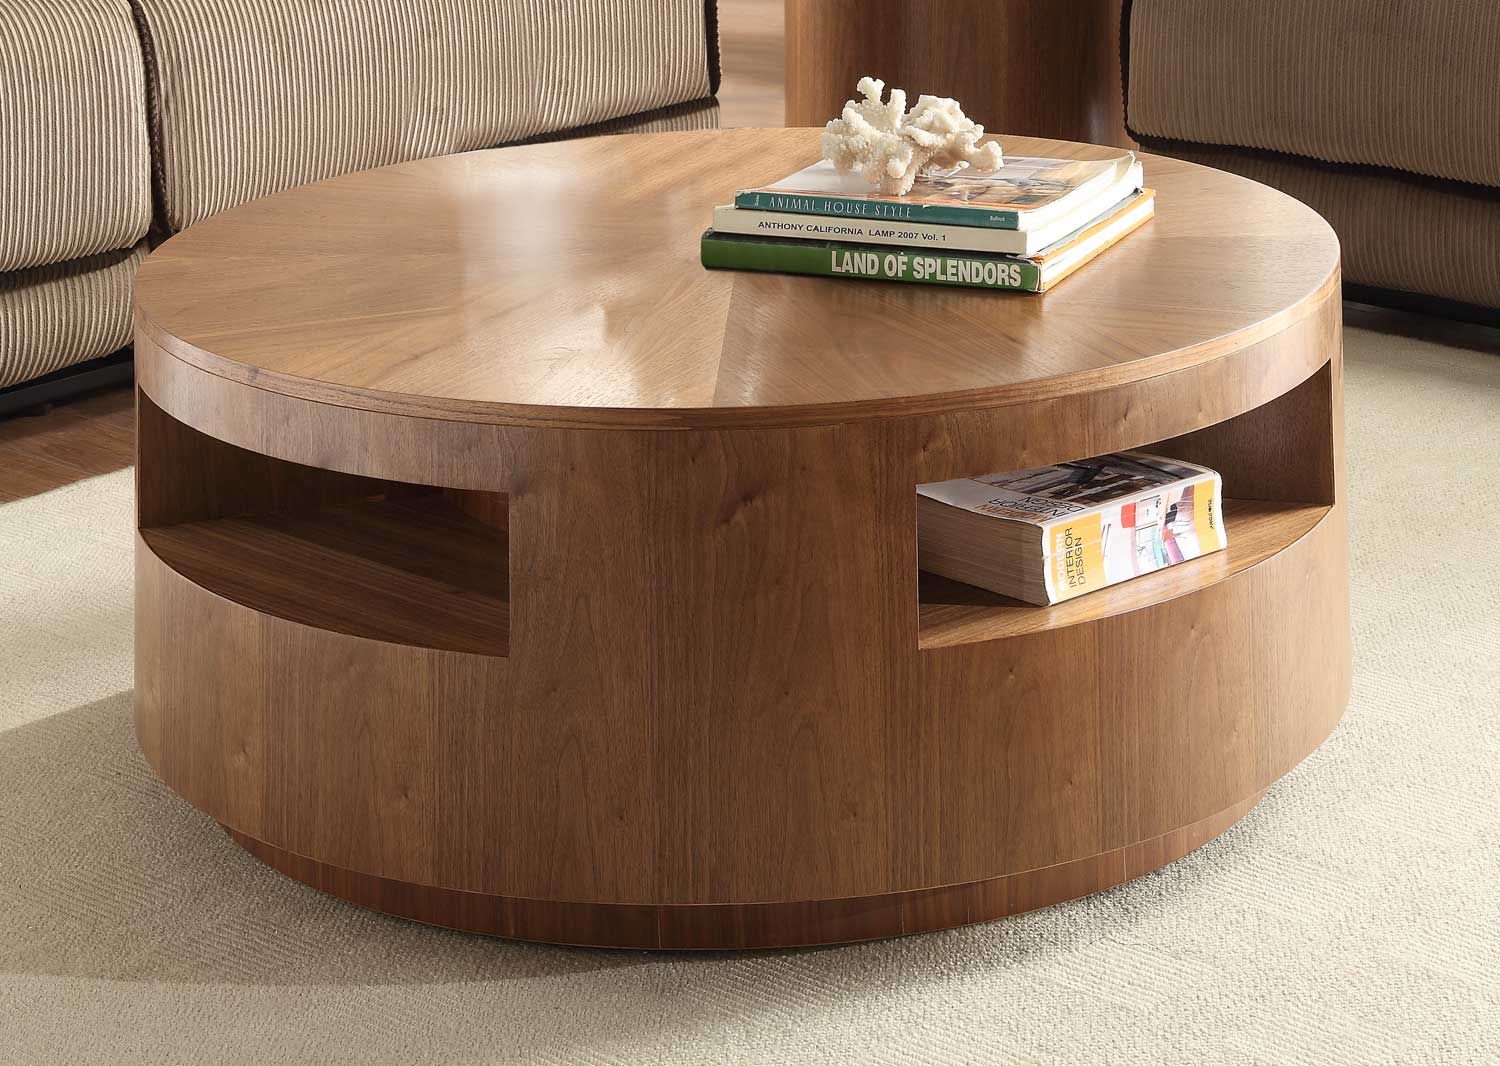 The Round Coffee Tables With Storage – The Simple And Compact Furniture Throughout Round Coffee Tables (View 2 of 15)